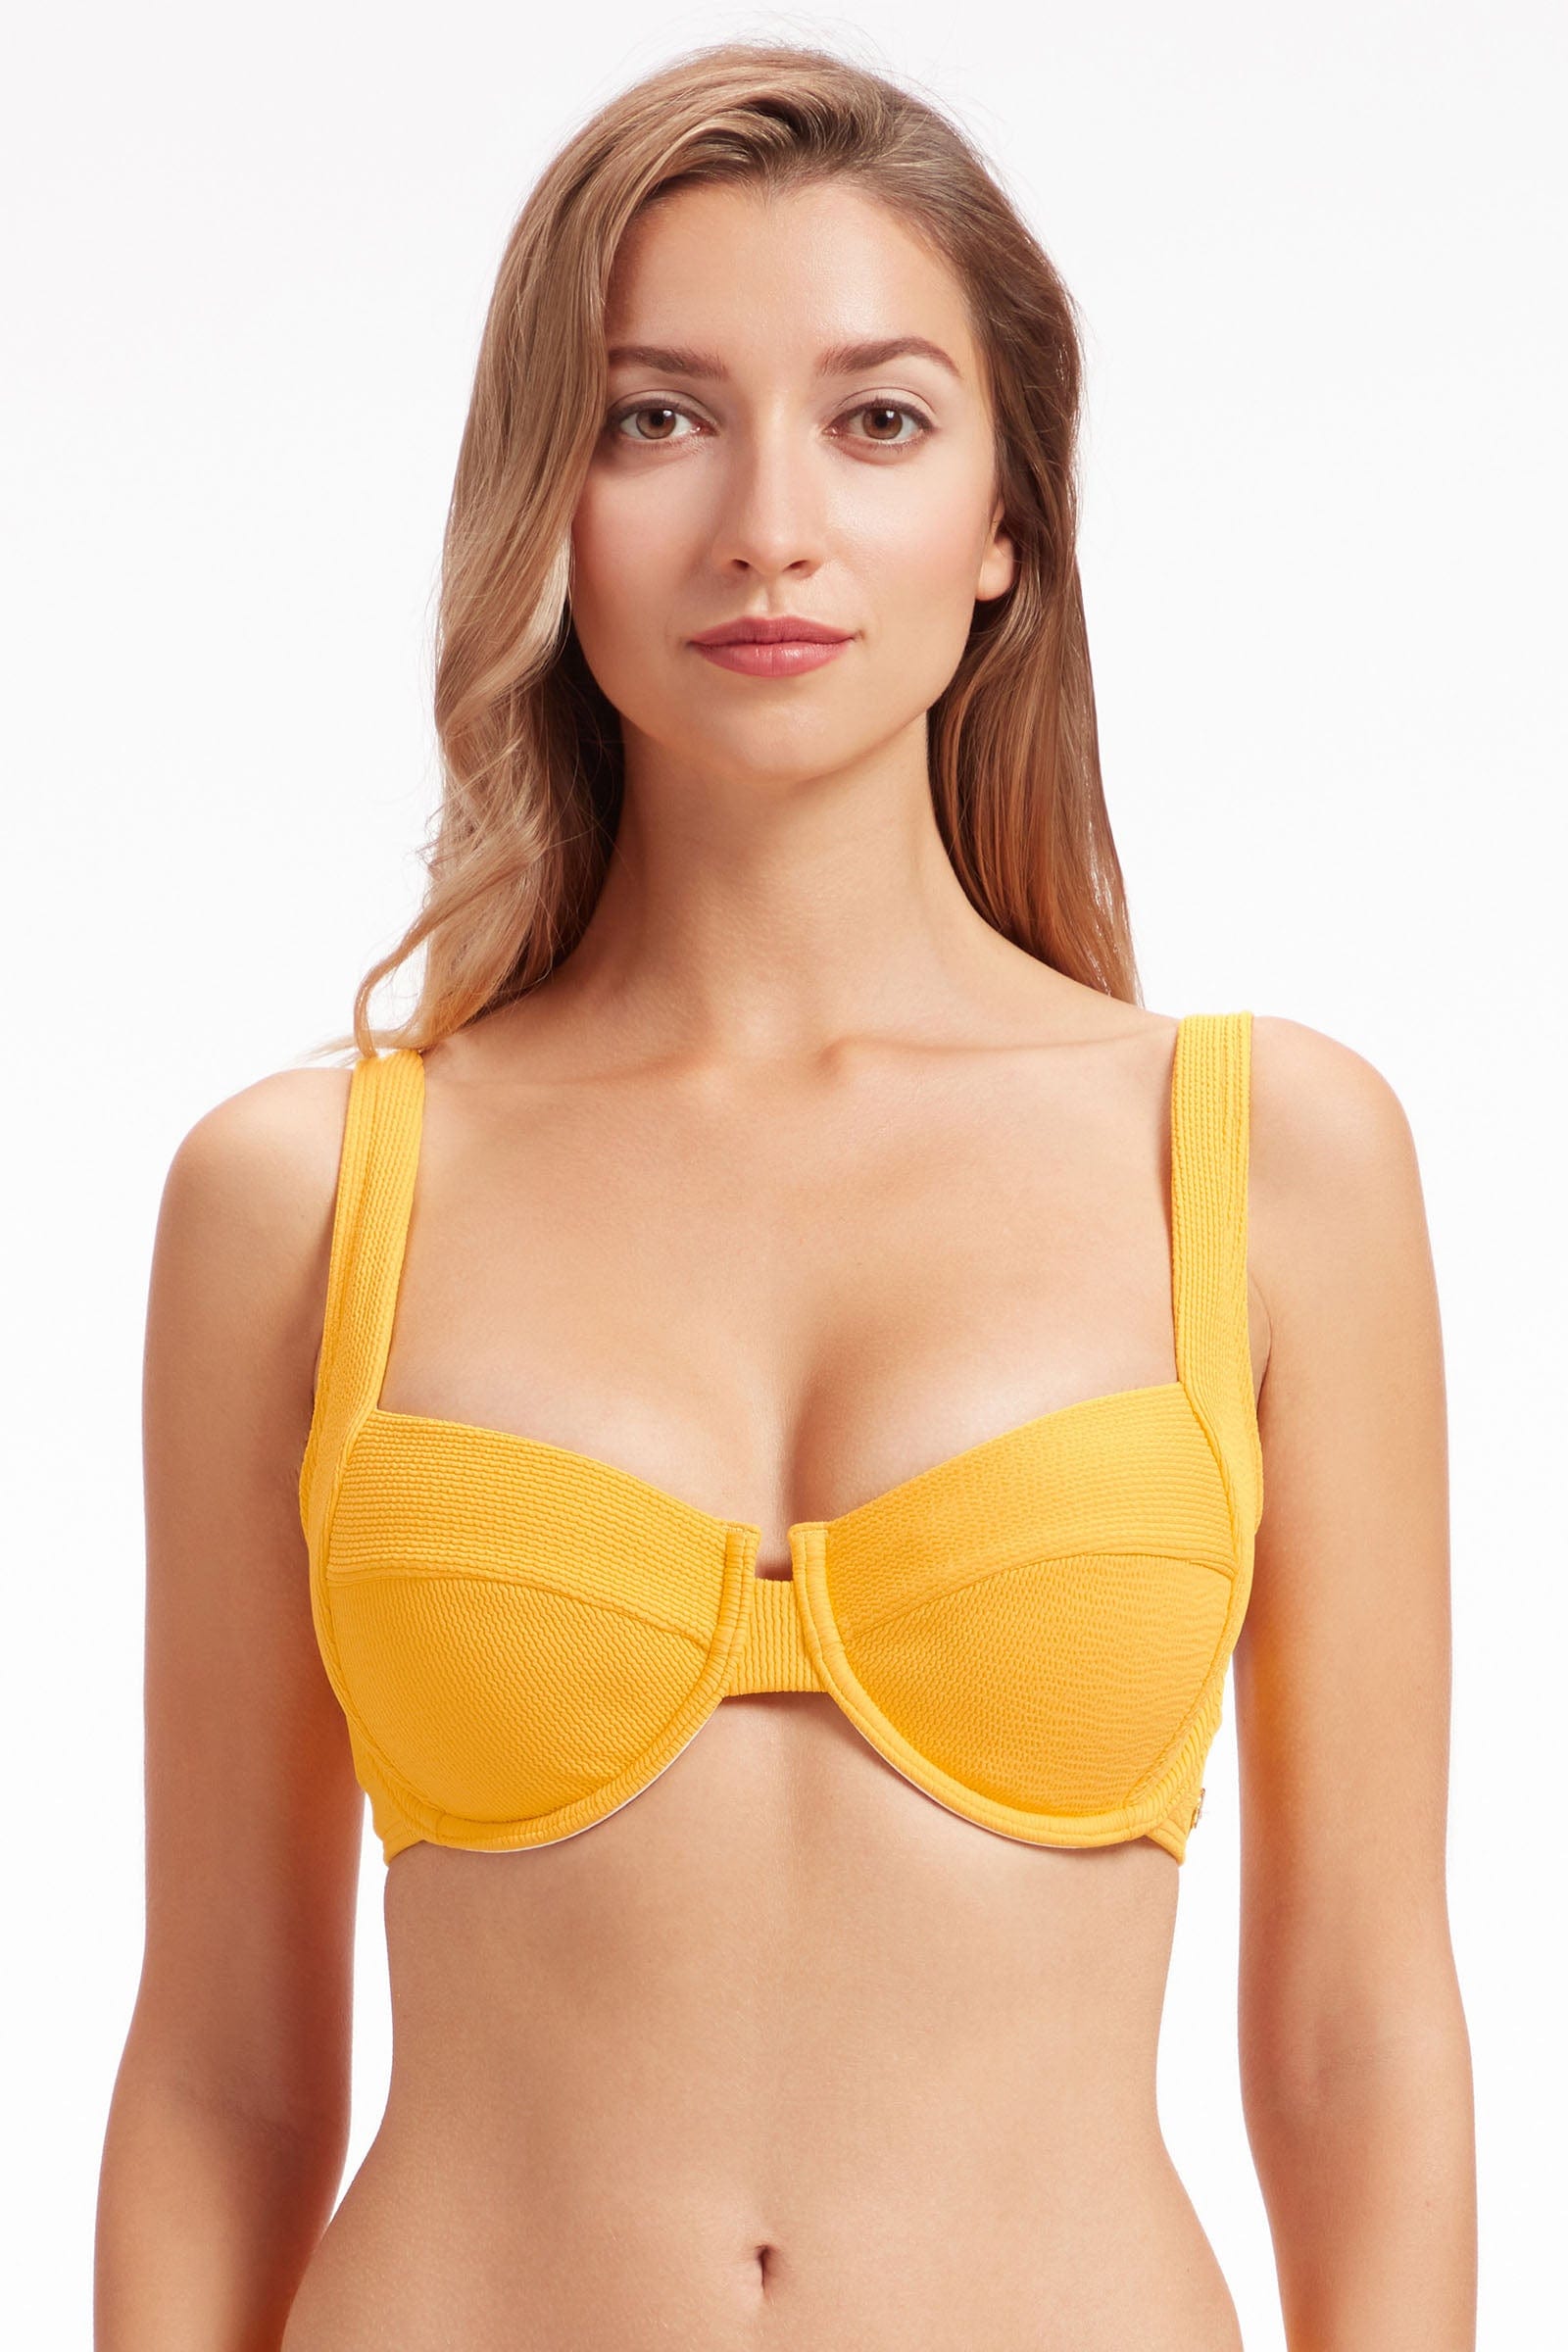 Shop for E CUP, Yellow, Lingerie